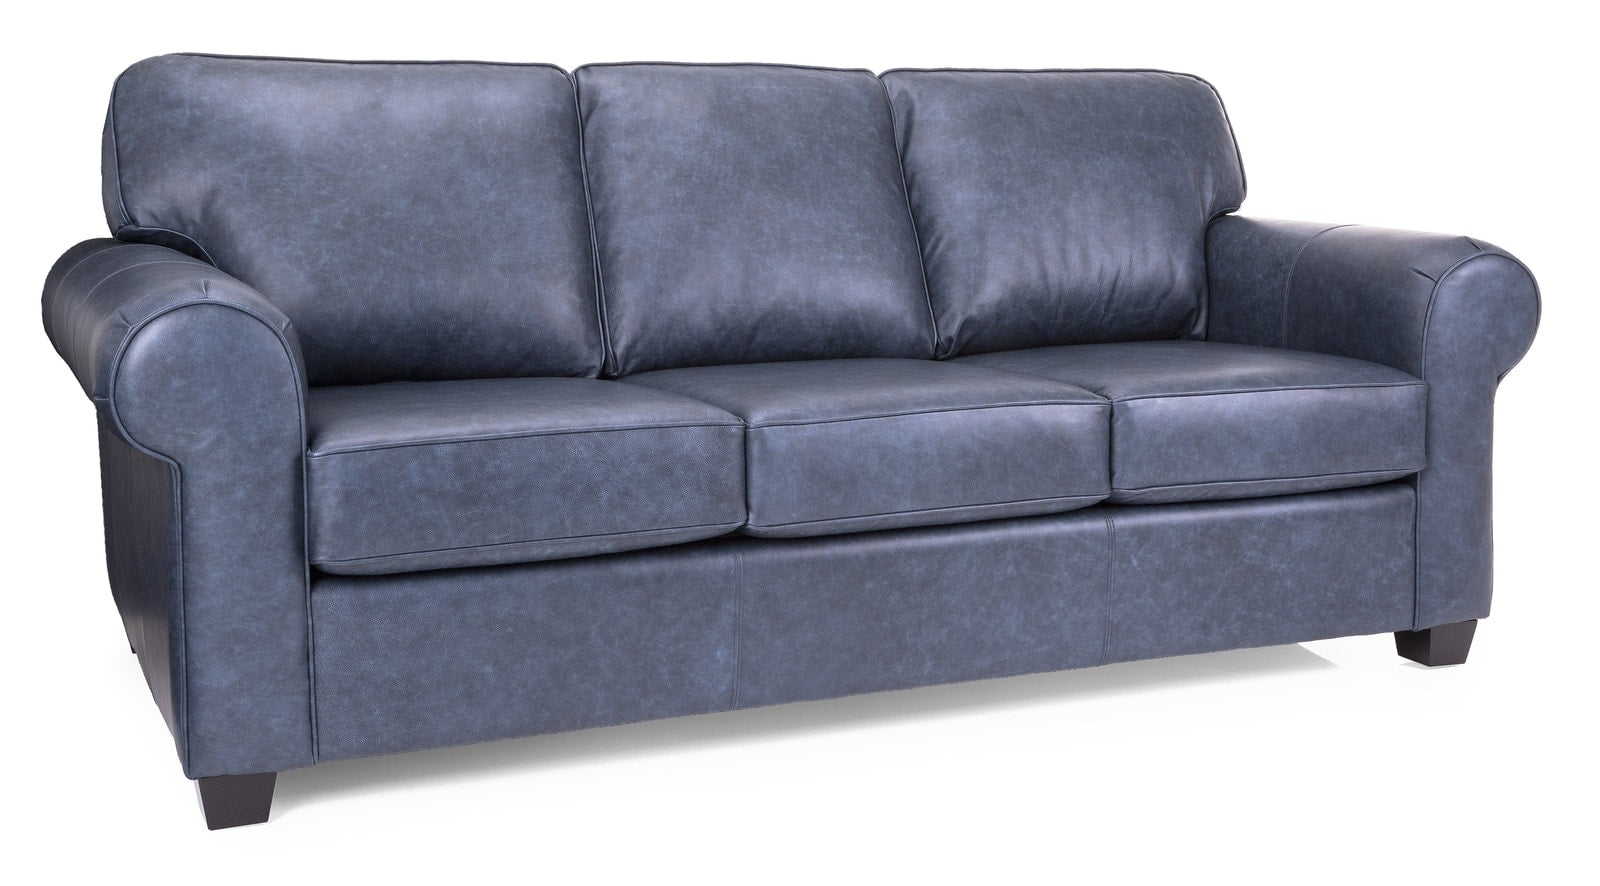 84" Or 75" Custom Sofabed